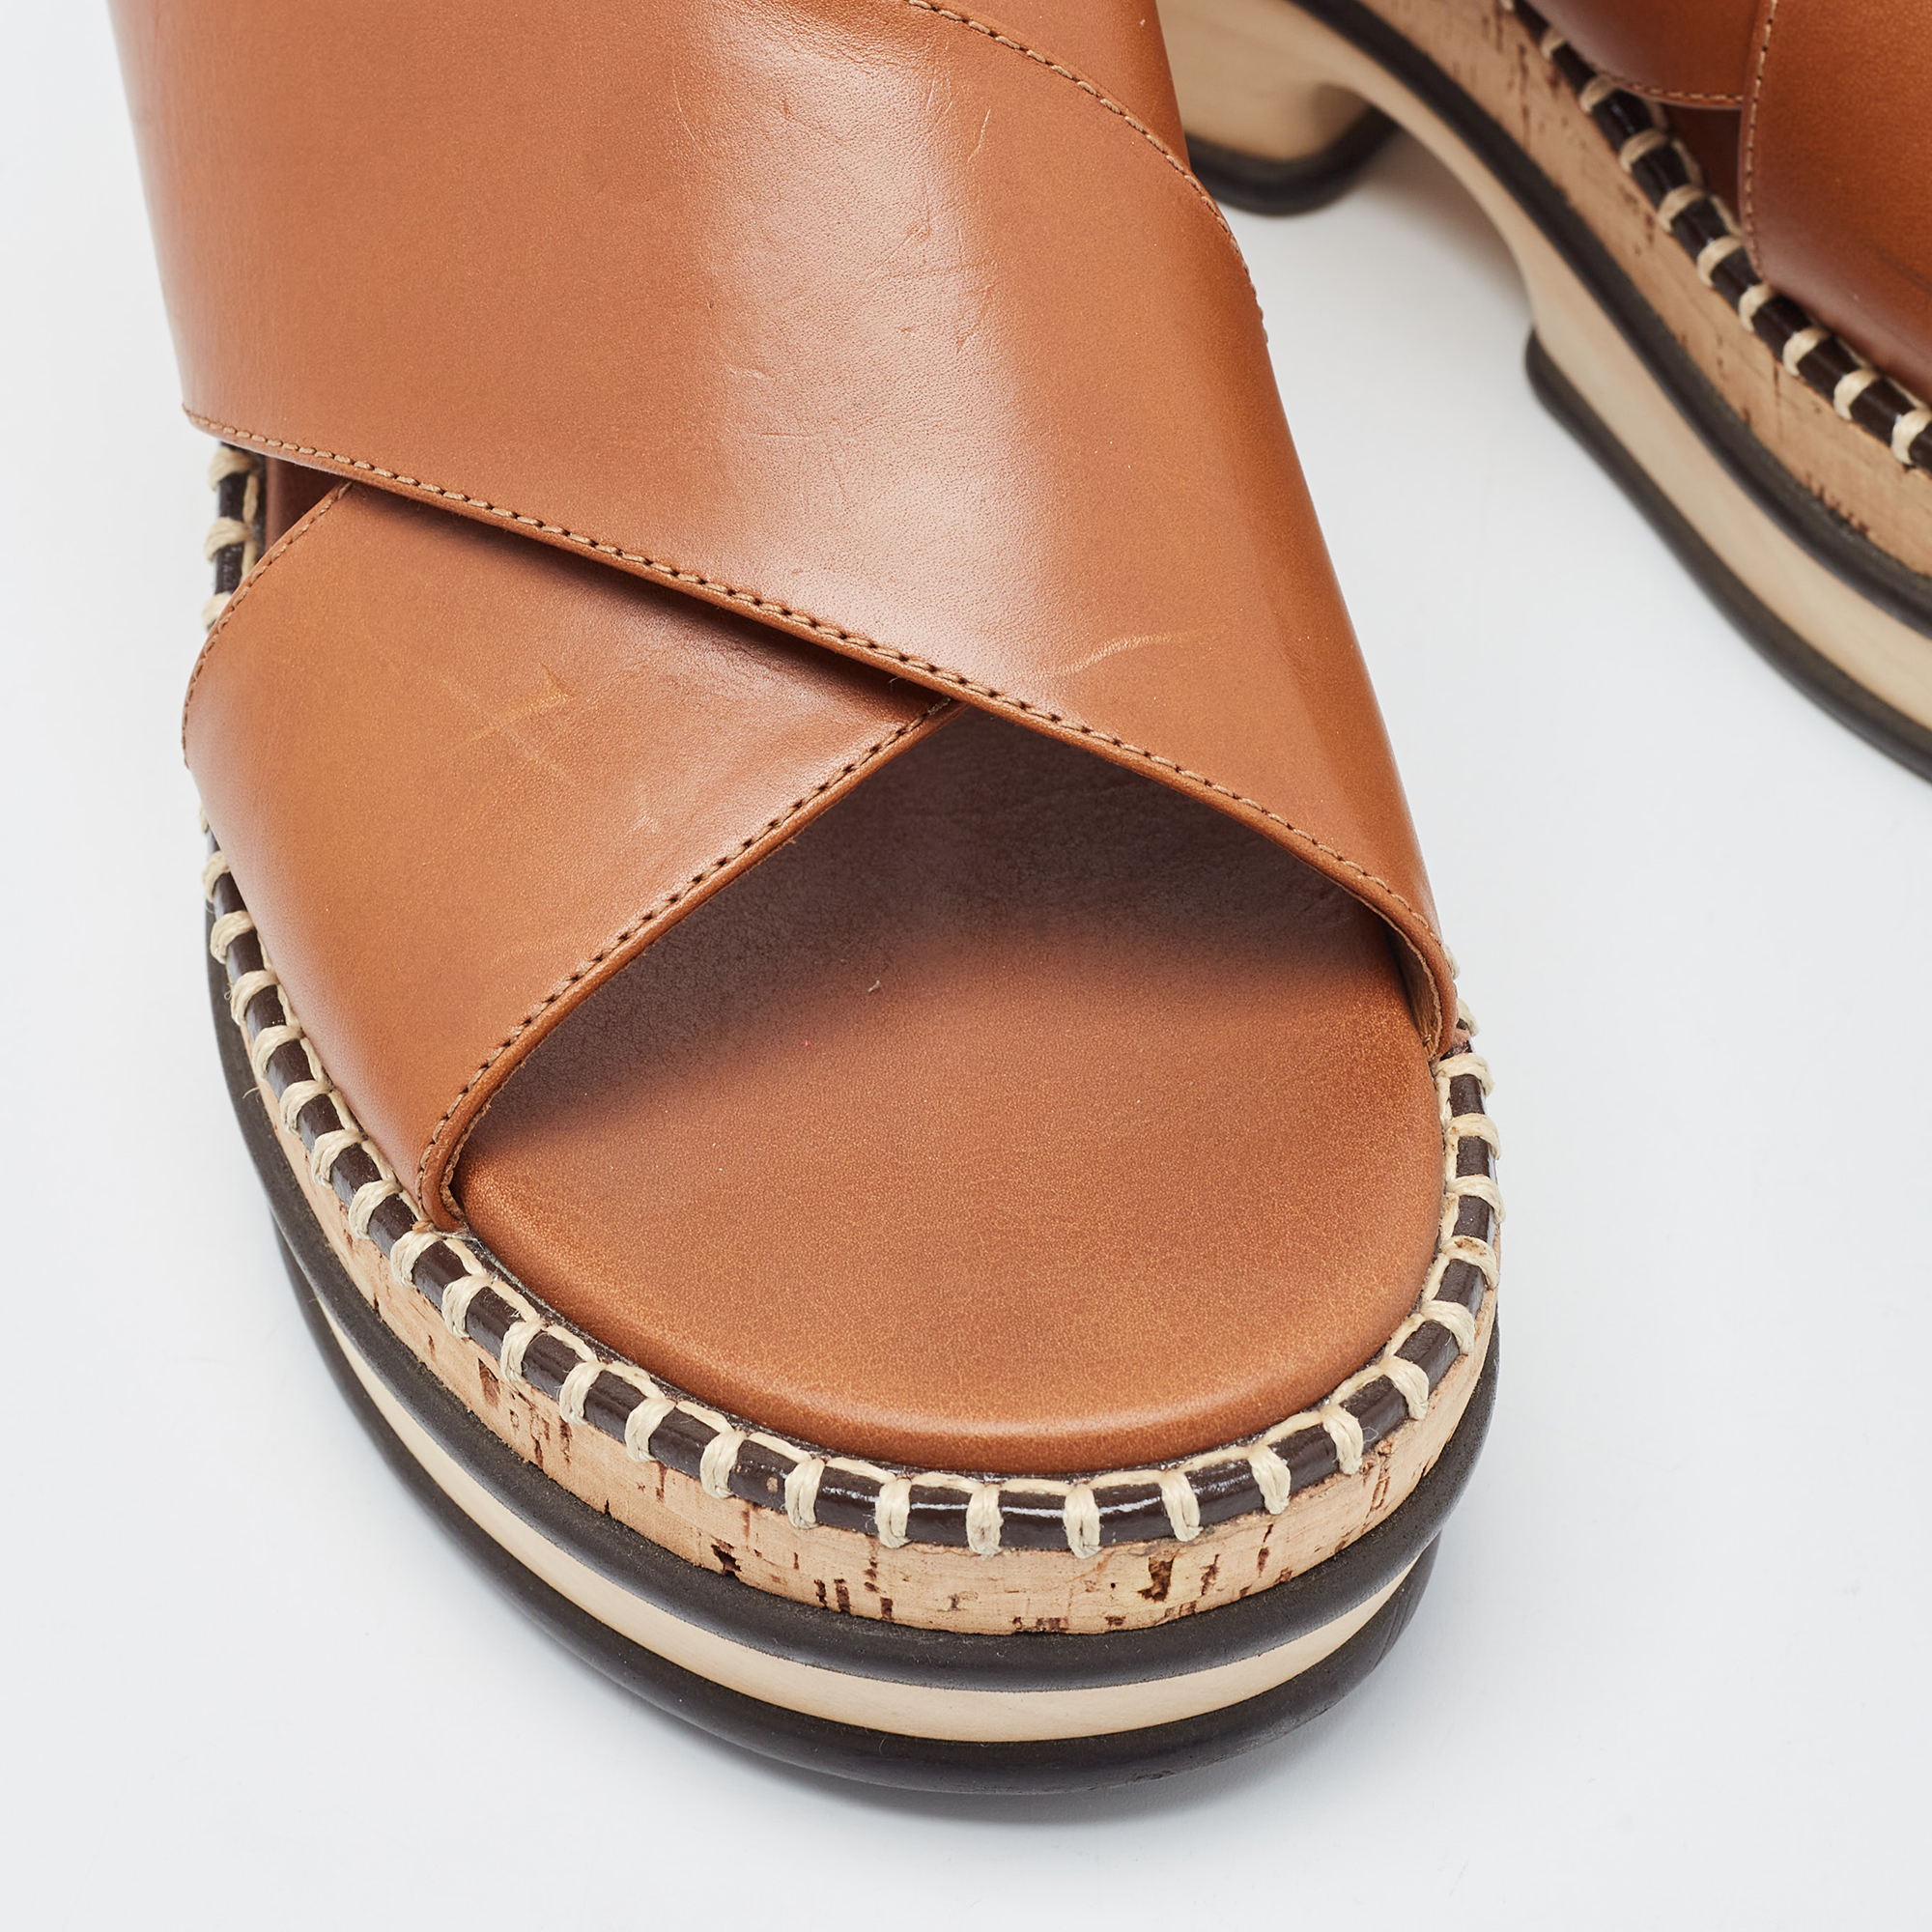 Chloe Brown Leather Woody Leather Slides Sandals Size 37